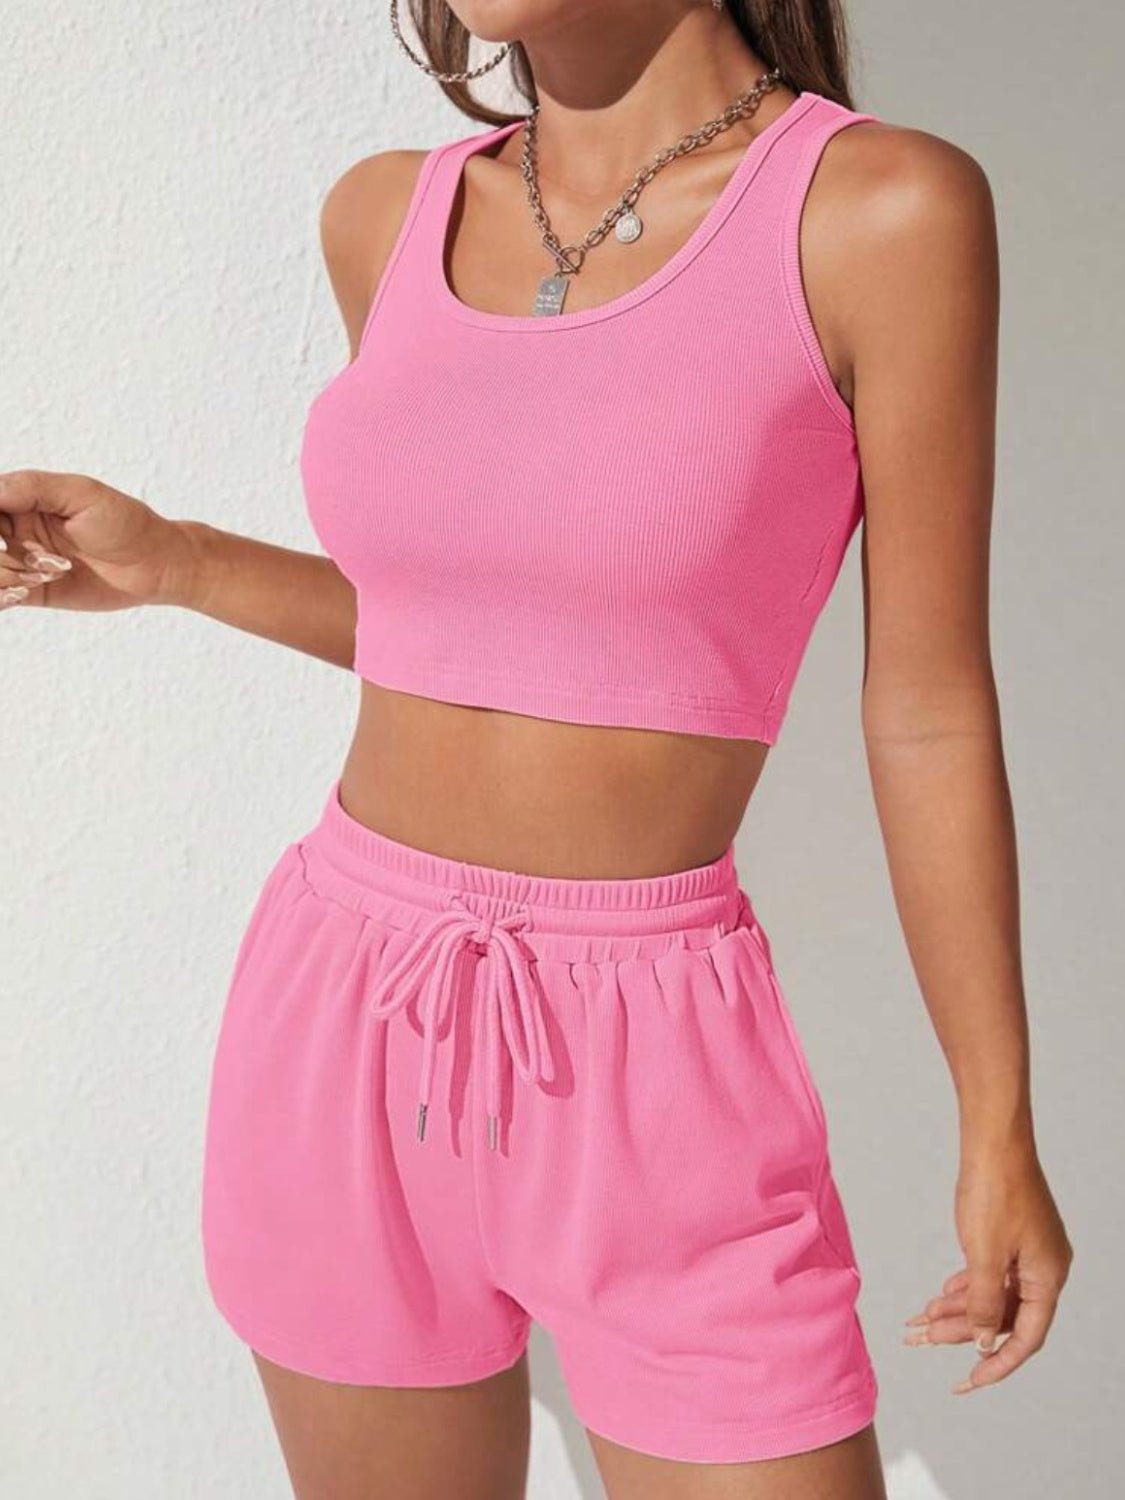 Scoop Neck Wide Strap Top and Drawstring Shorts Set - EMMY